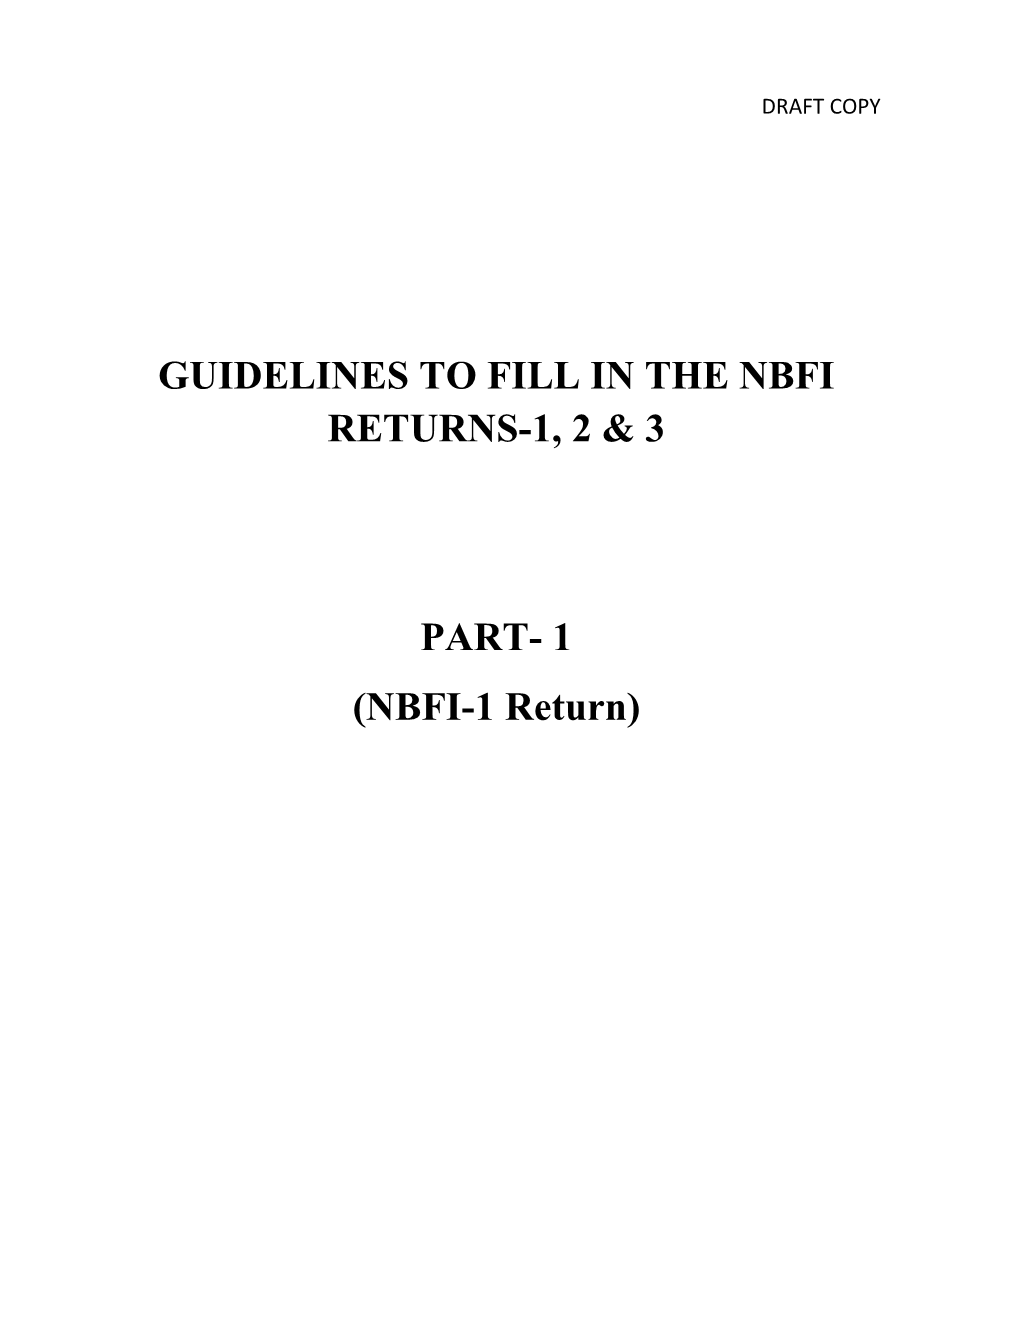 Guidelines to Fill in the Nbfi Returns-1, 2 & 3 Part